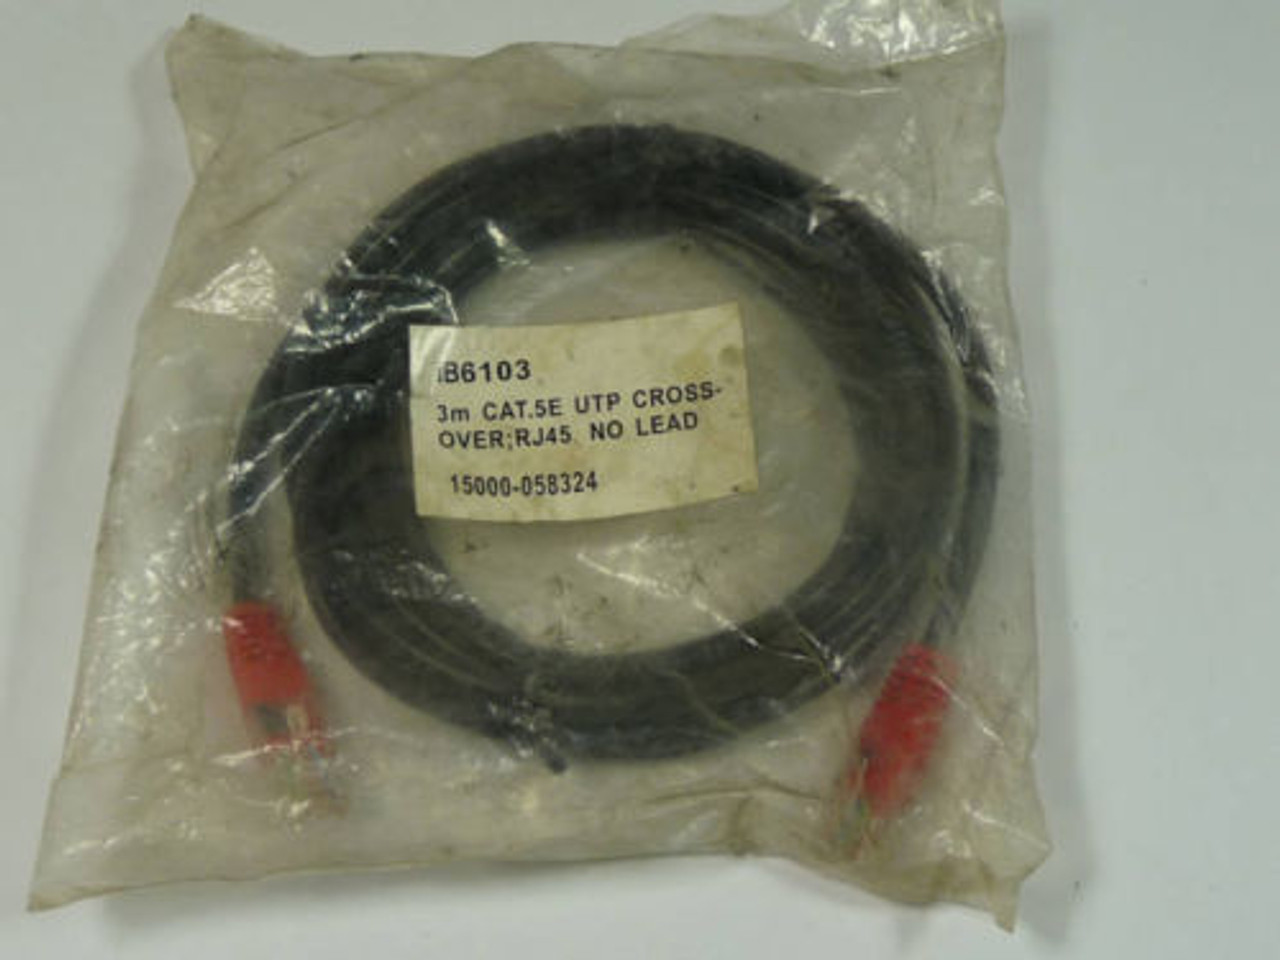 3M Ethernet UTP Cross-Over Cable 5E IB6103 ! NEW !